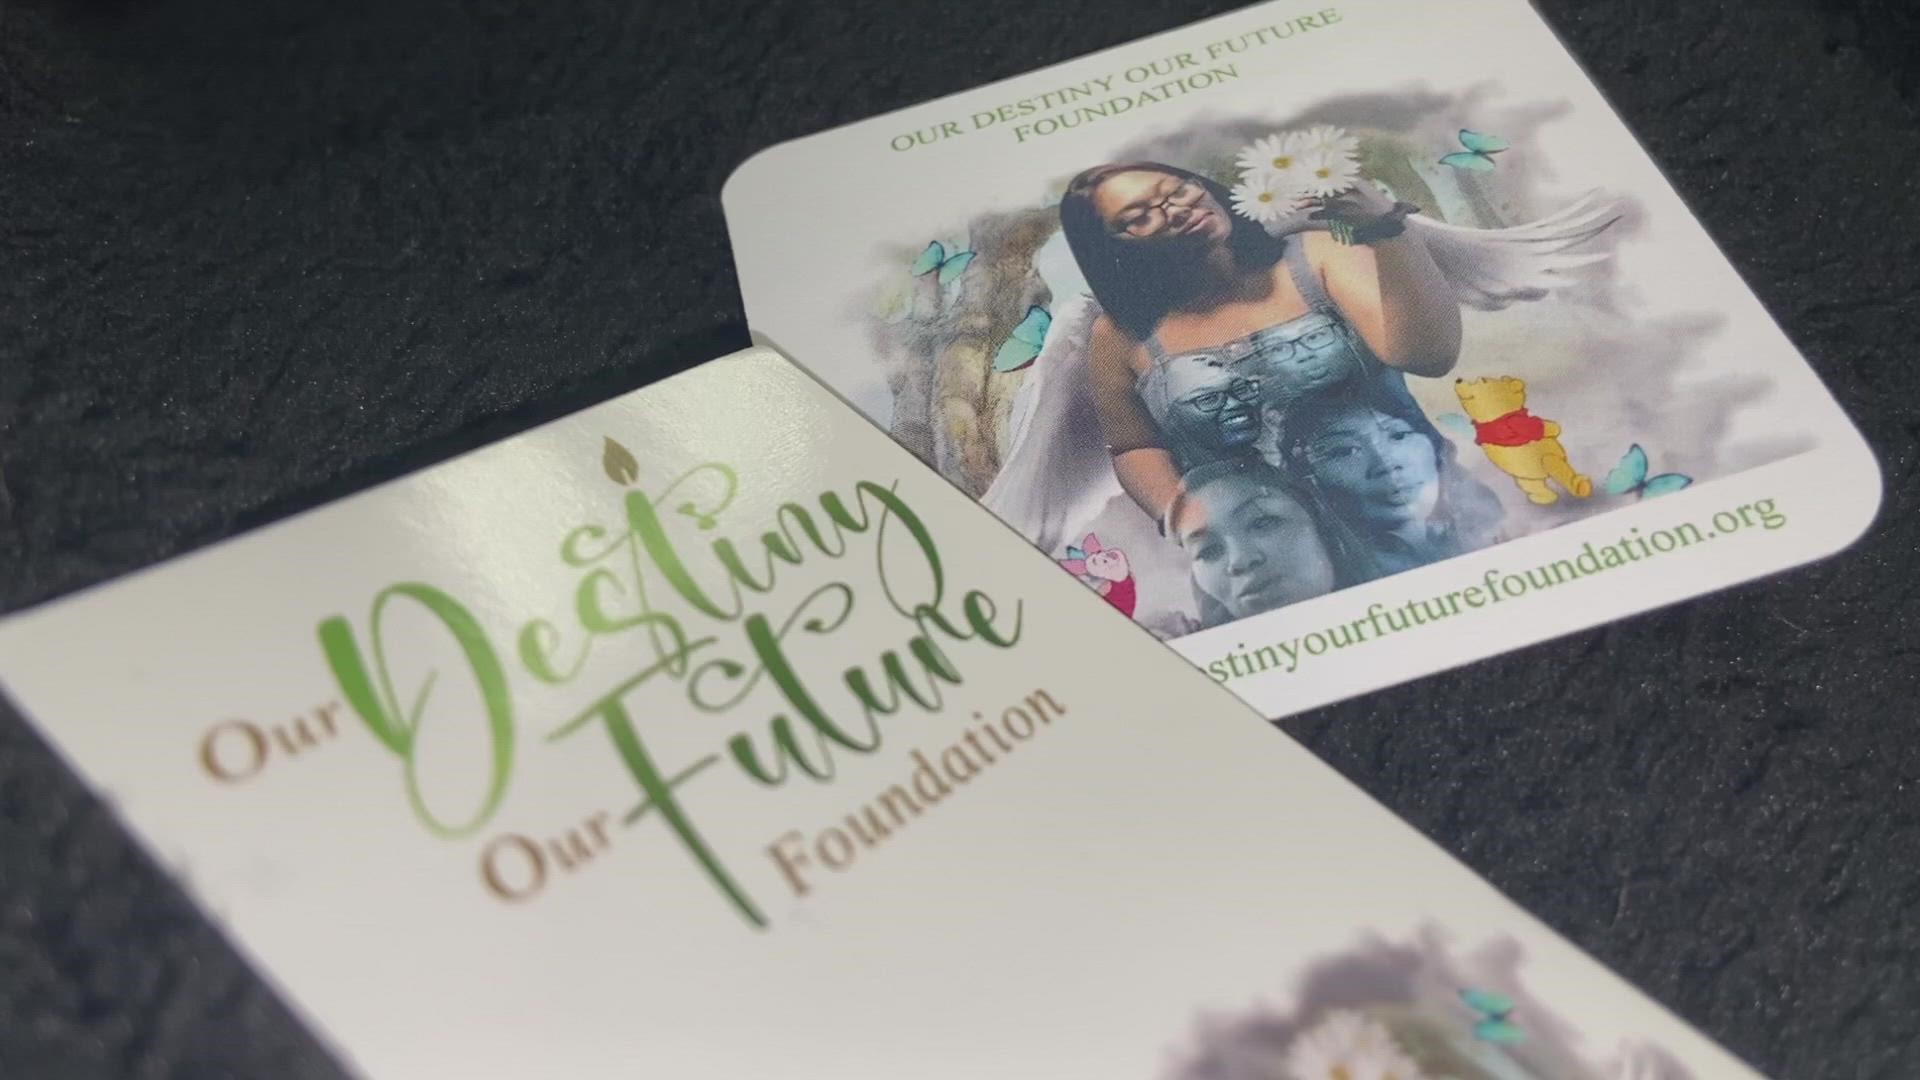 Destiny McClain was killed by a stray bullet while ordering at a food truck in 2021. Her family has created a scholarship and foundation in her memory.